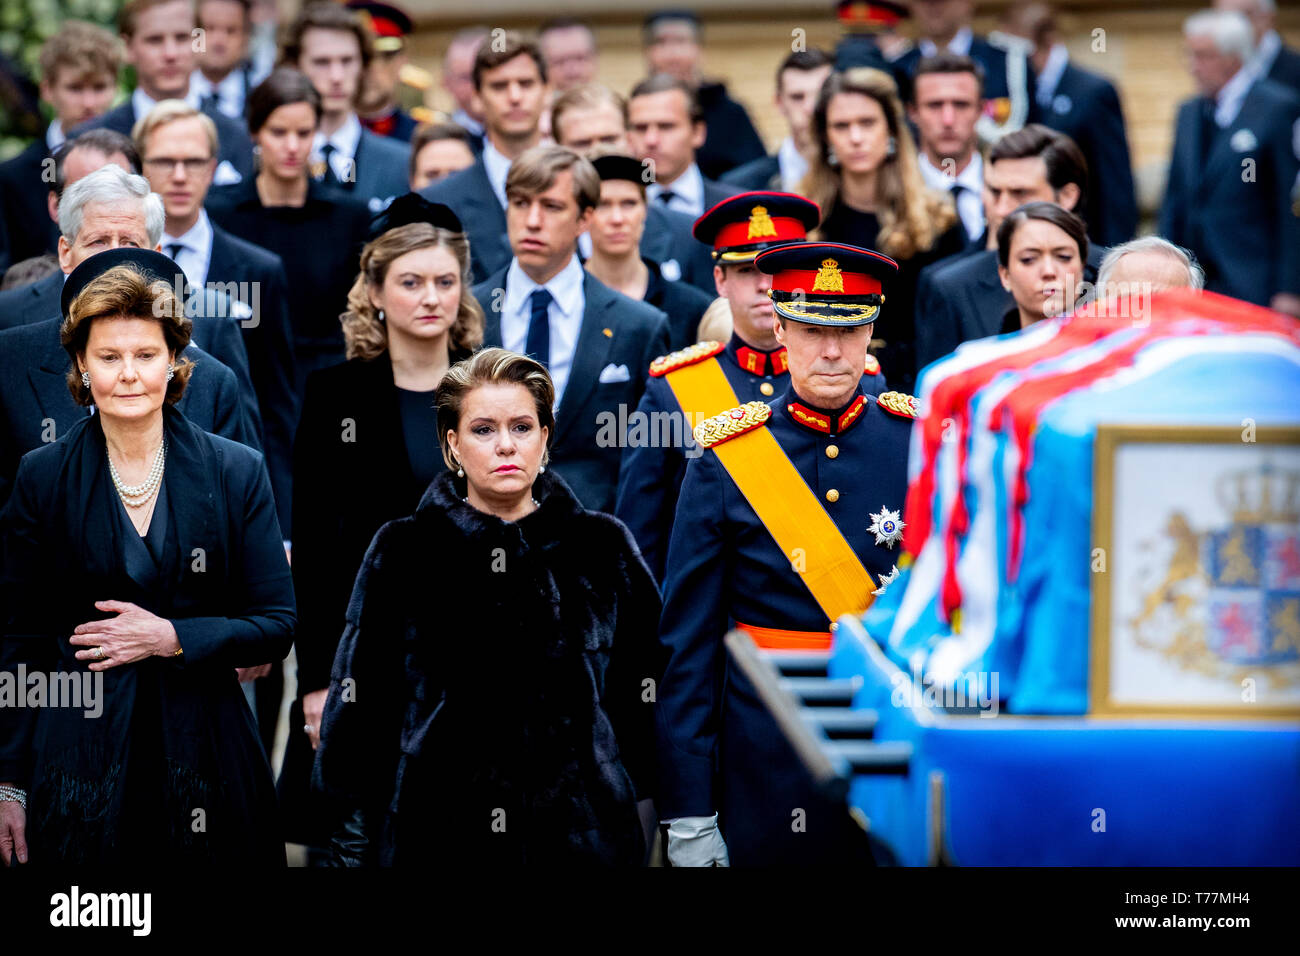 Grand Duke Henri, Grand Duchess Maria Teresa, Prince Guillaume, Prince Jean, Arch Duchess Marie Astrid and Princess Margaretha of Luxembourg at Funeral of Grand Duke Jean at the Cathedral in Luxembourg, 4 May 2019. Photo: Patrick van Katwijk | Stock Photo